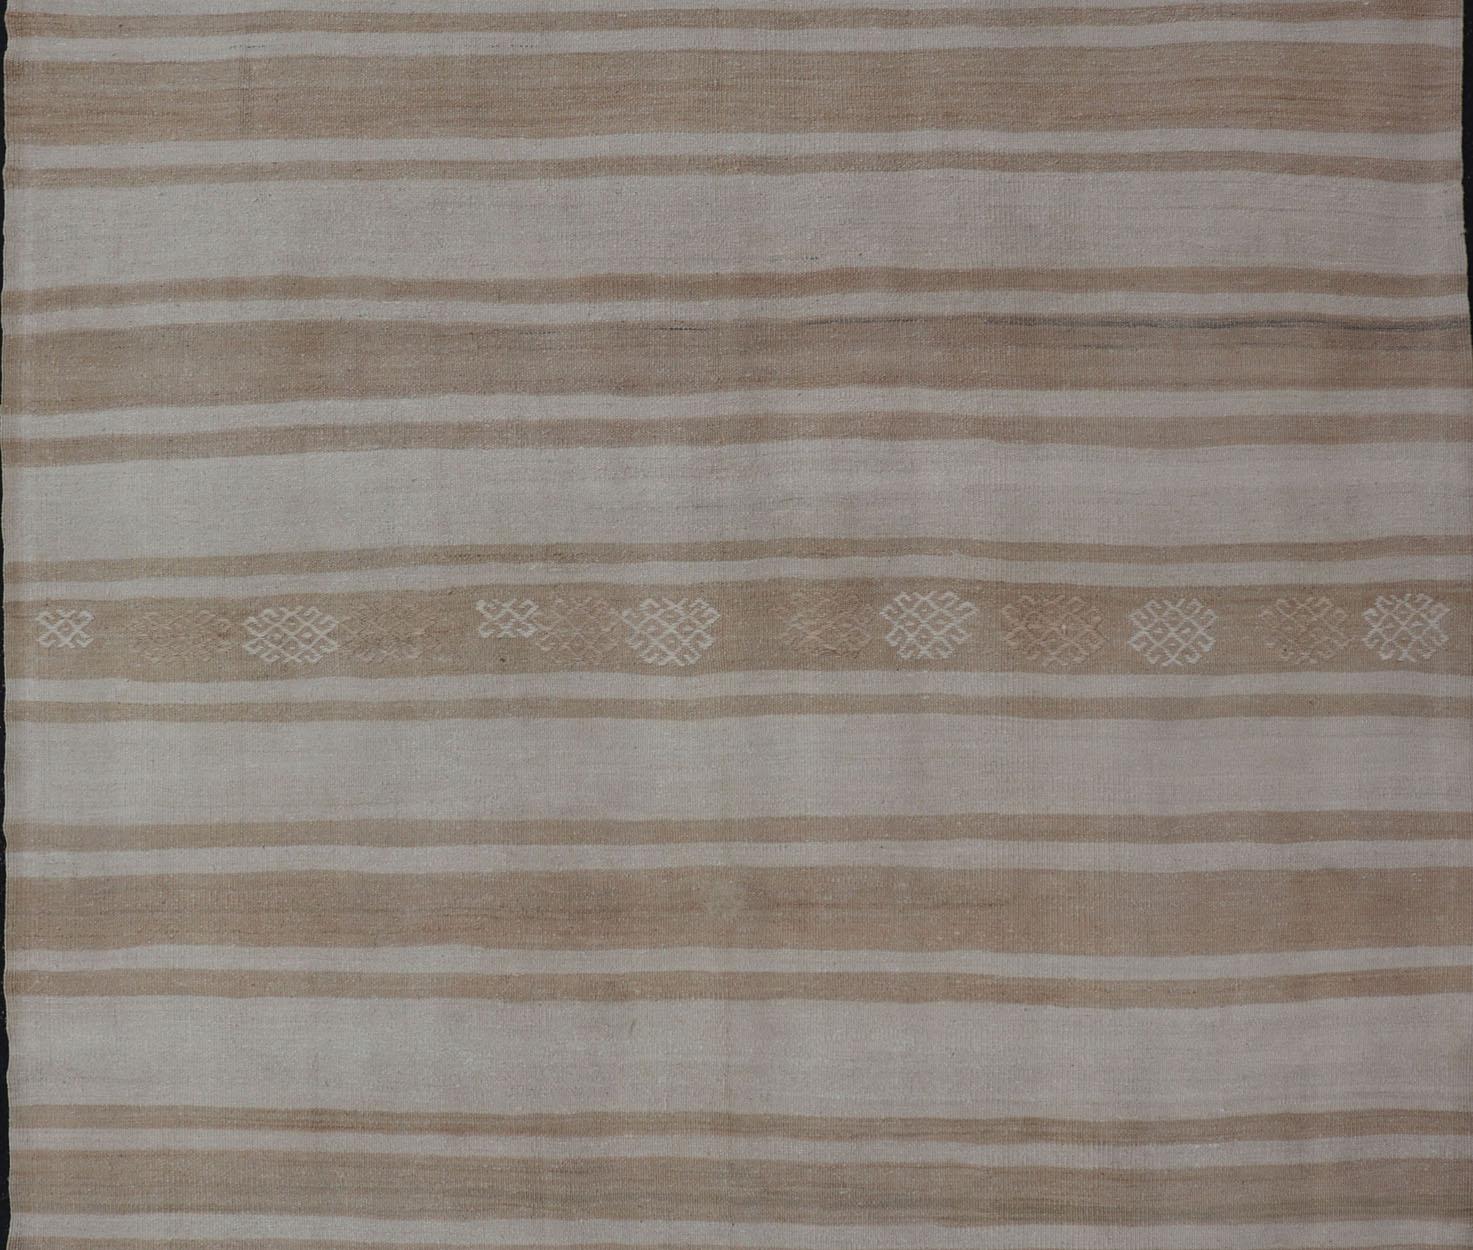 Hand-Woven Square Flat-Weave Kilim Vintage Rug from Turkey with Horizontal Stripes in Taupe For Sale